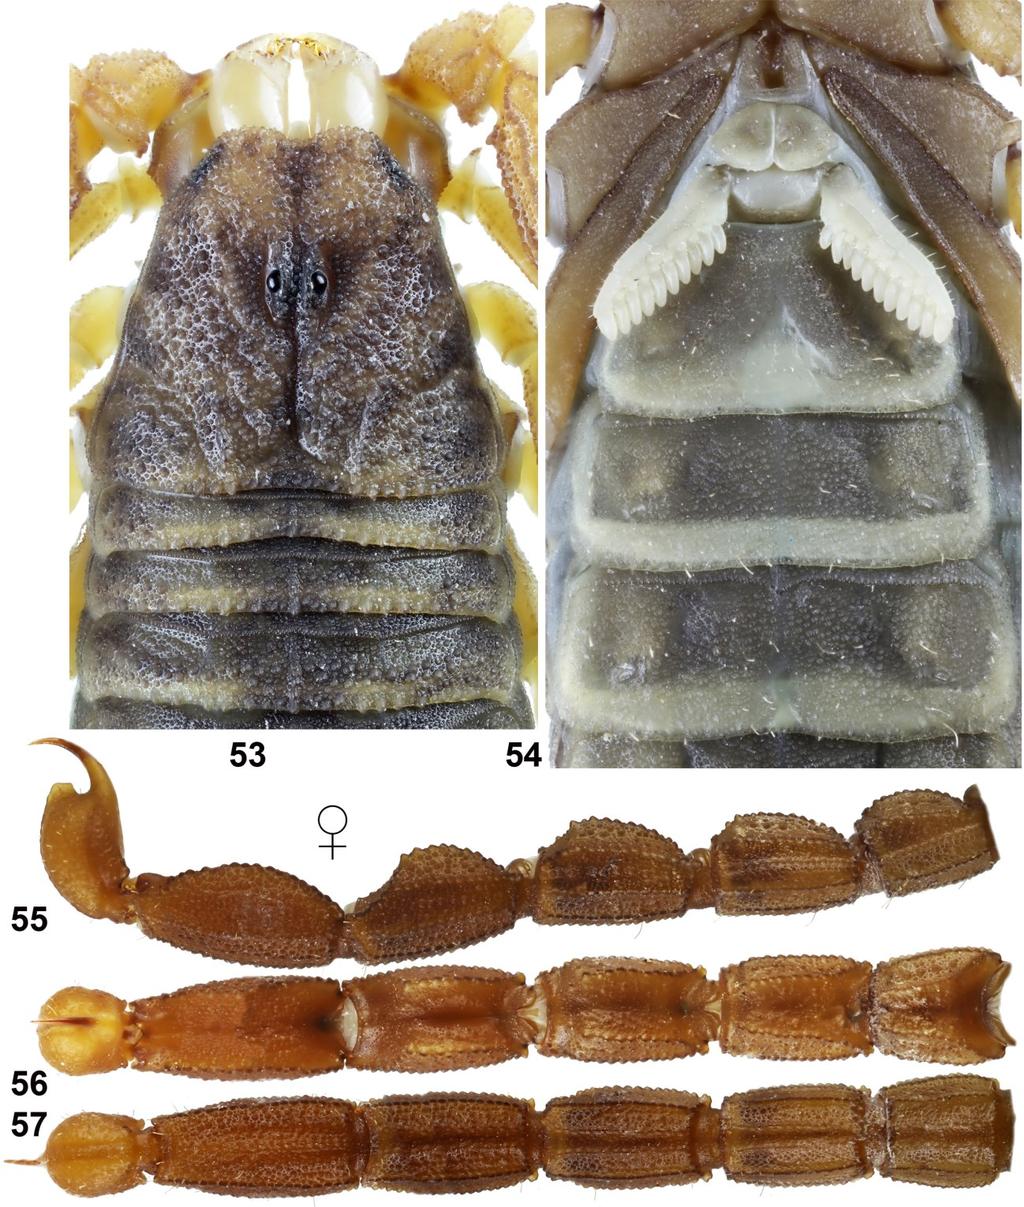 14 Euscorpius 2016, No. 218 Figures 53 57: Chaneke baldazoi sp. n., paratype female, chelicerae, carapace and tergites I III (53), and sternopectinal region and sternites III V (54).